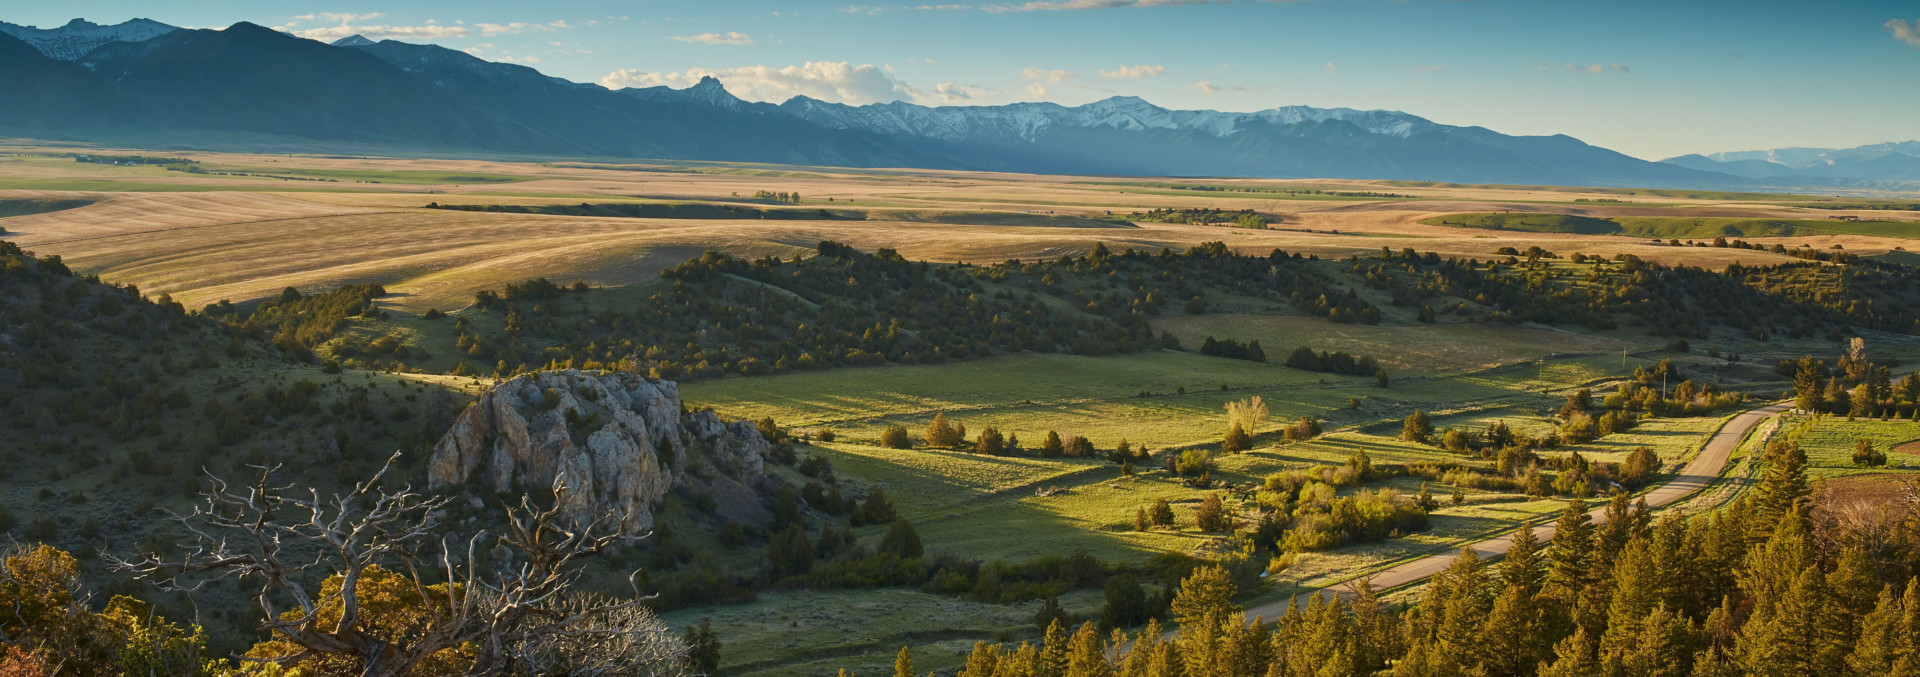 strategies to owning a ranch from afar